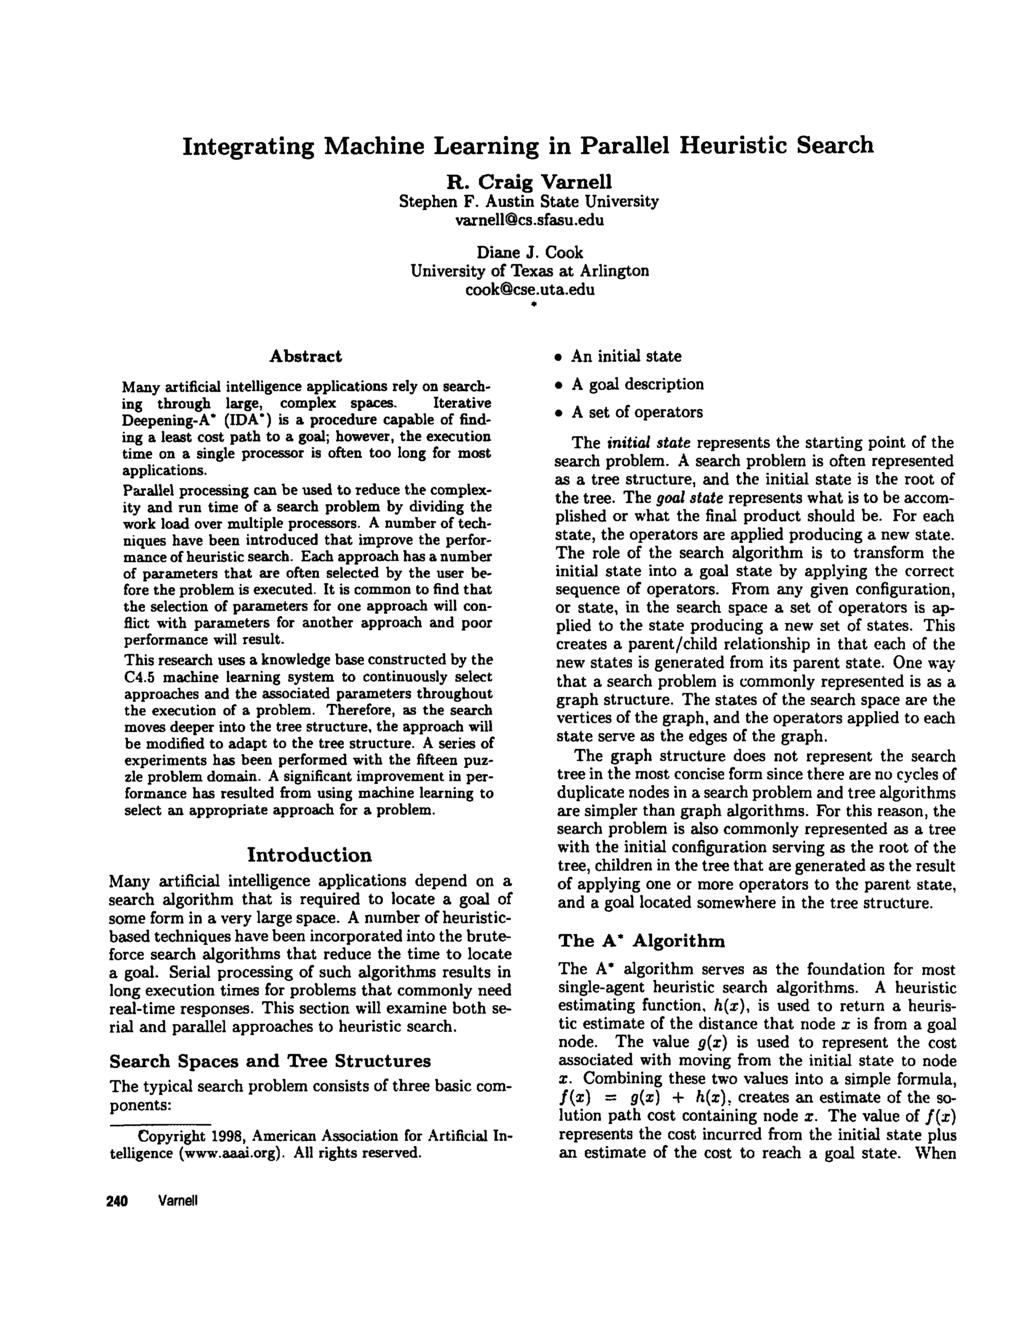 From: Proceedings of the Eleventh International FLAIRS Conference. Copyright 1998, AAAI (www.aaai.org). All rights reserved. Integrating Machine Learning in Parallel Heuristic Search R.